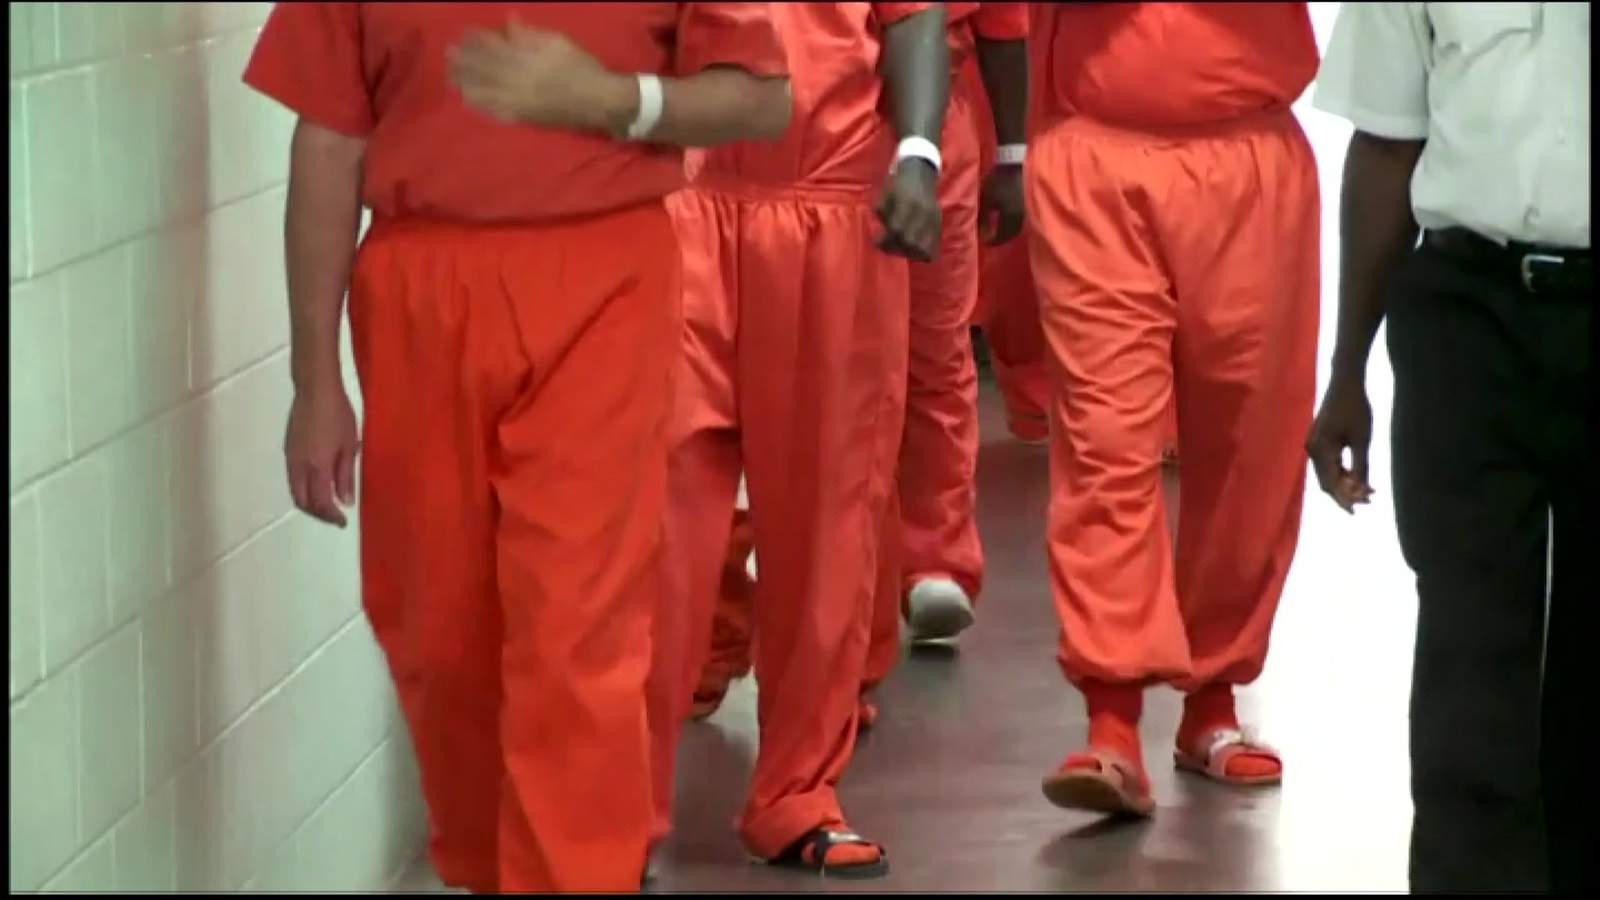 Harris County plans to further reduce jail population after juvenile offender contracted coronavirus